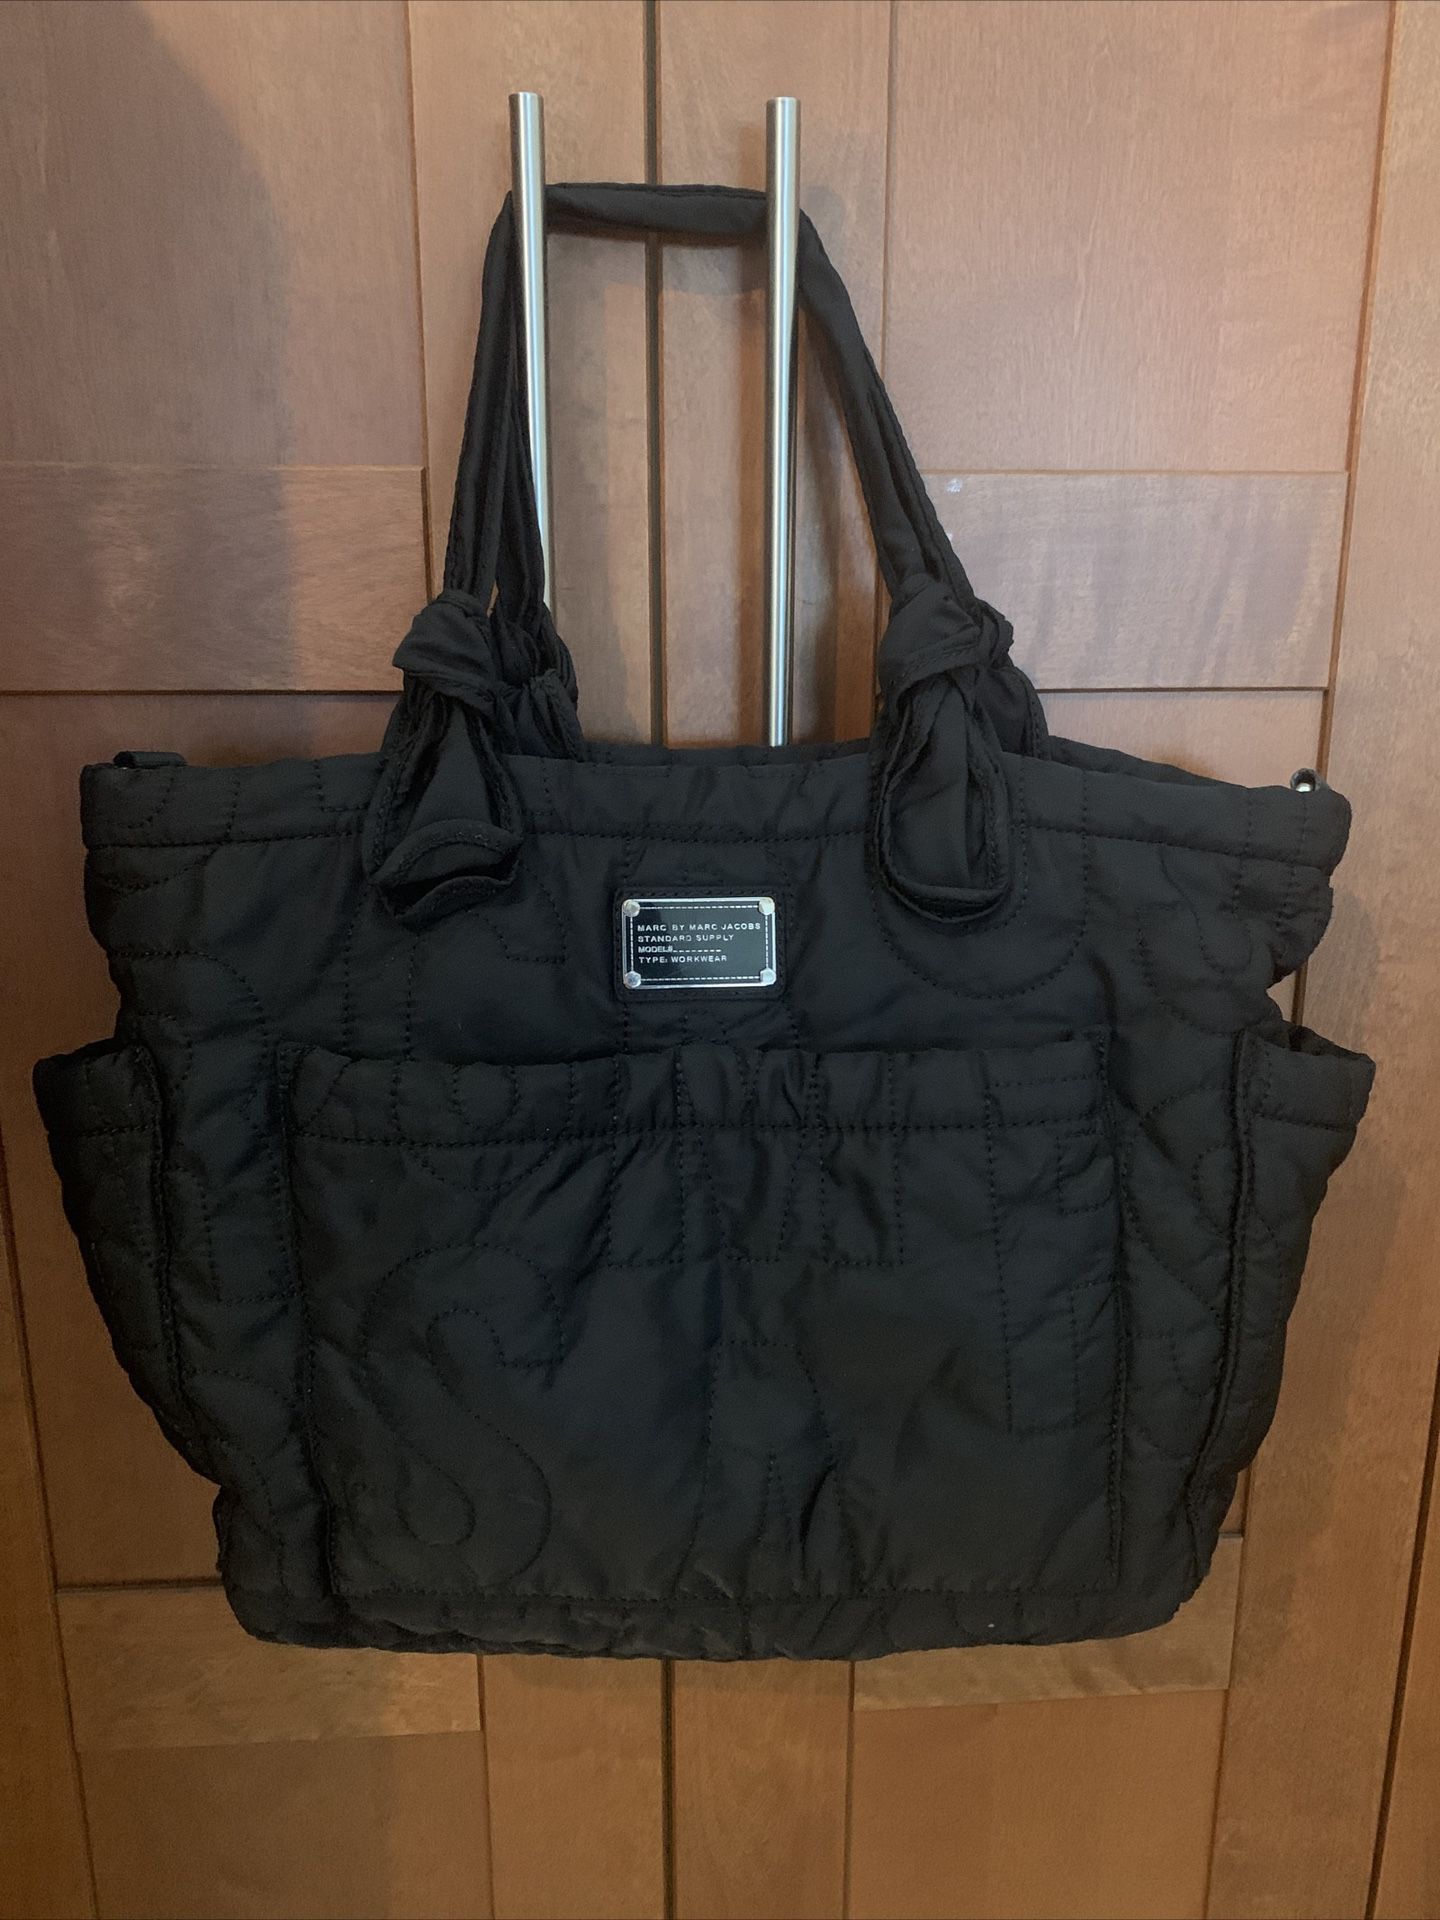 Marc by Marc Jacobs Tote Eliza Eliz-a-baby Black Quilted Nylon Baby Diaper Bag